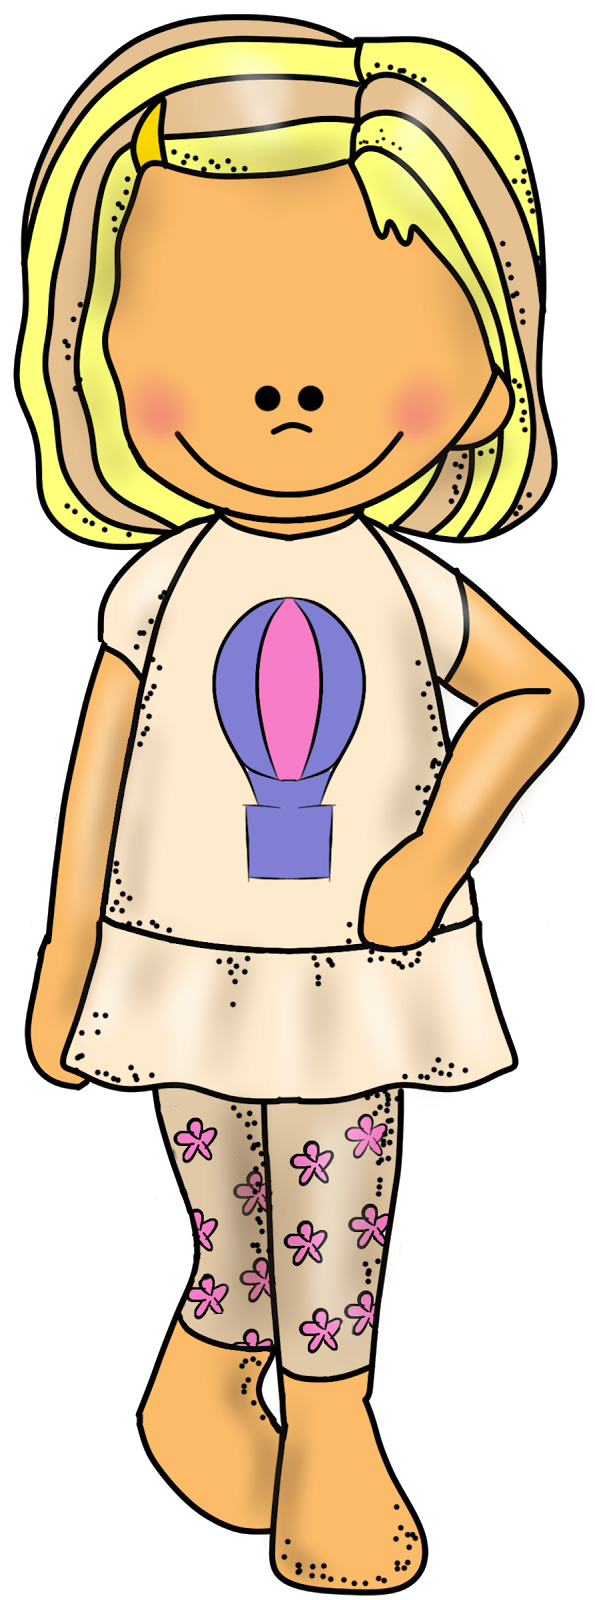 clipart of sister - photo #10